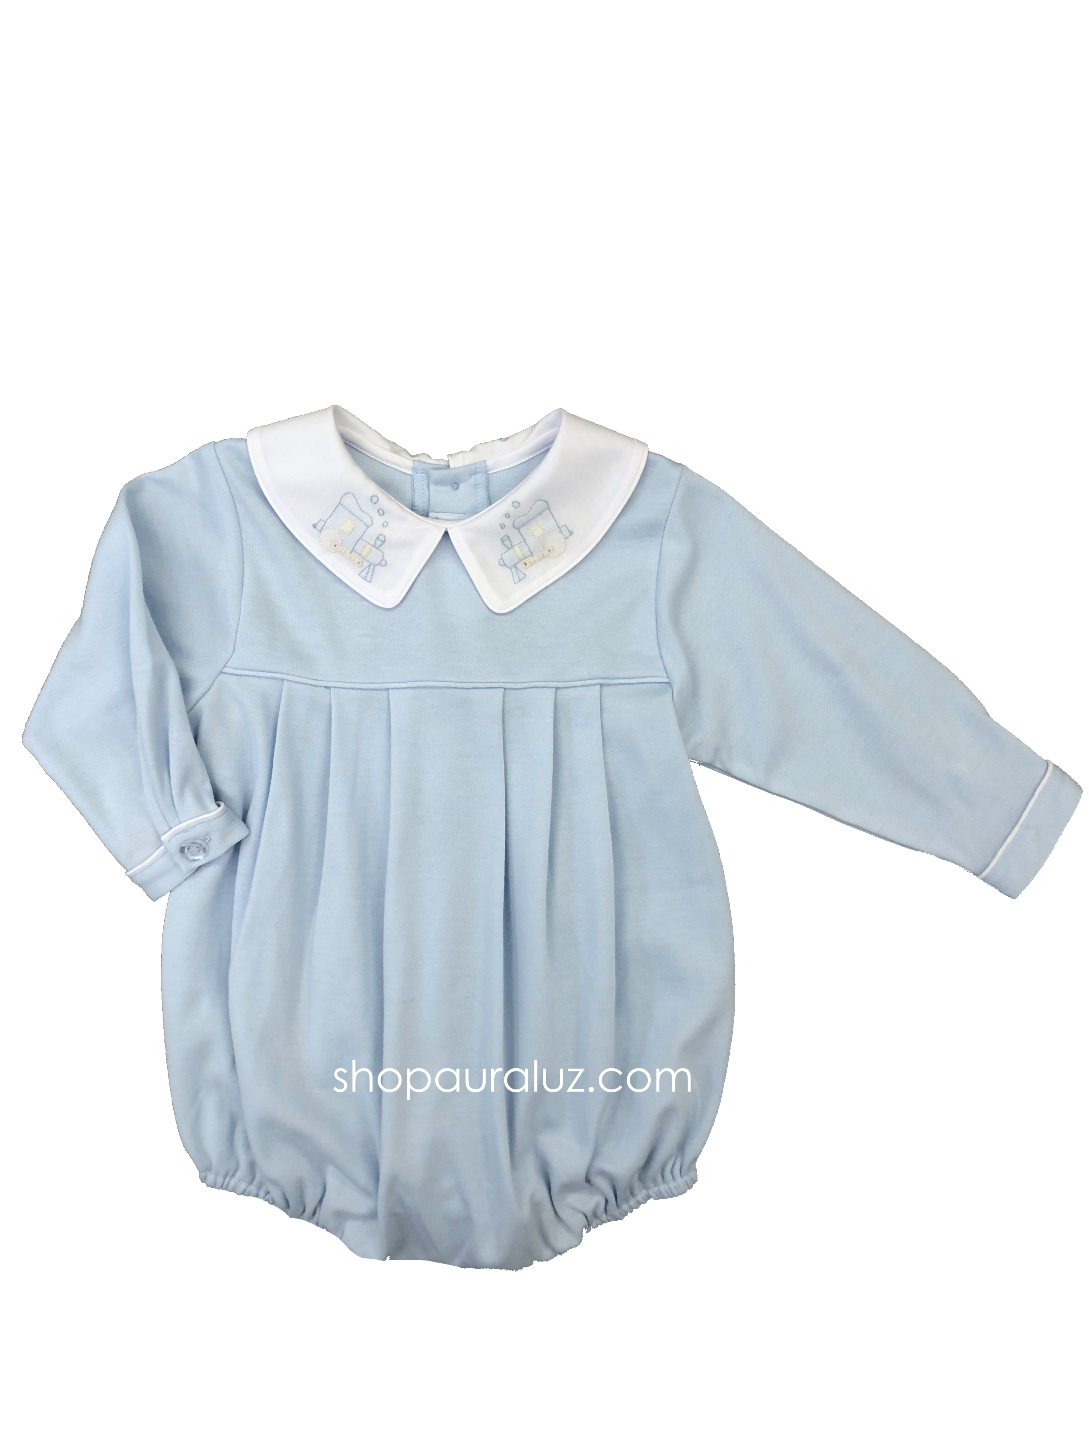 Auraluz Knit Bubble l/s...Blue with boy collar and embroidered trains